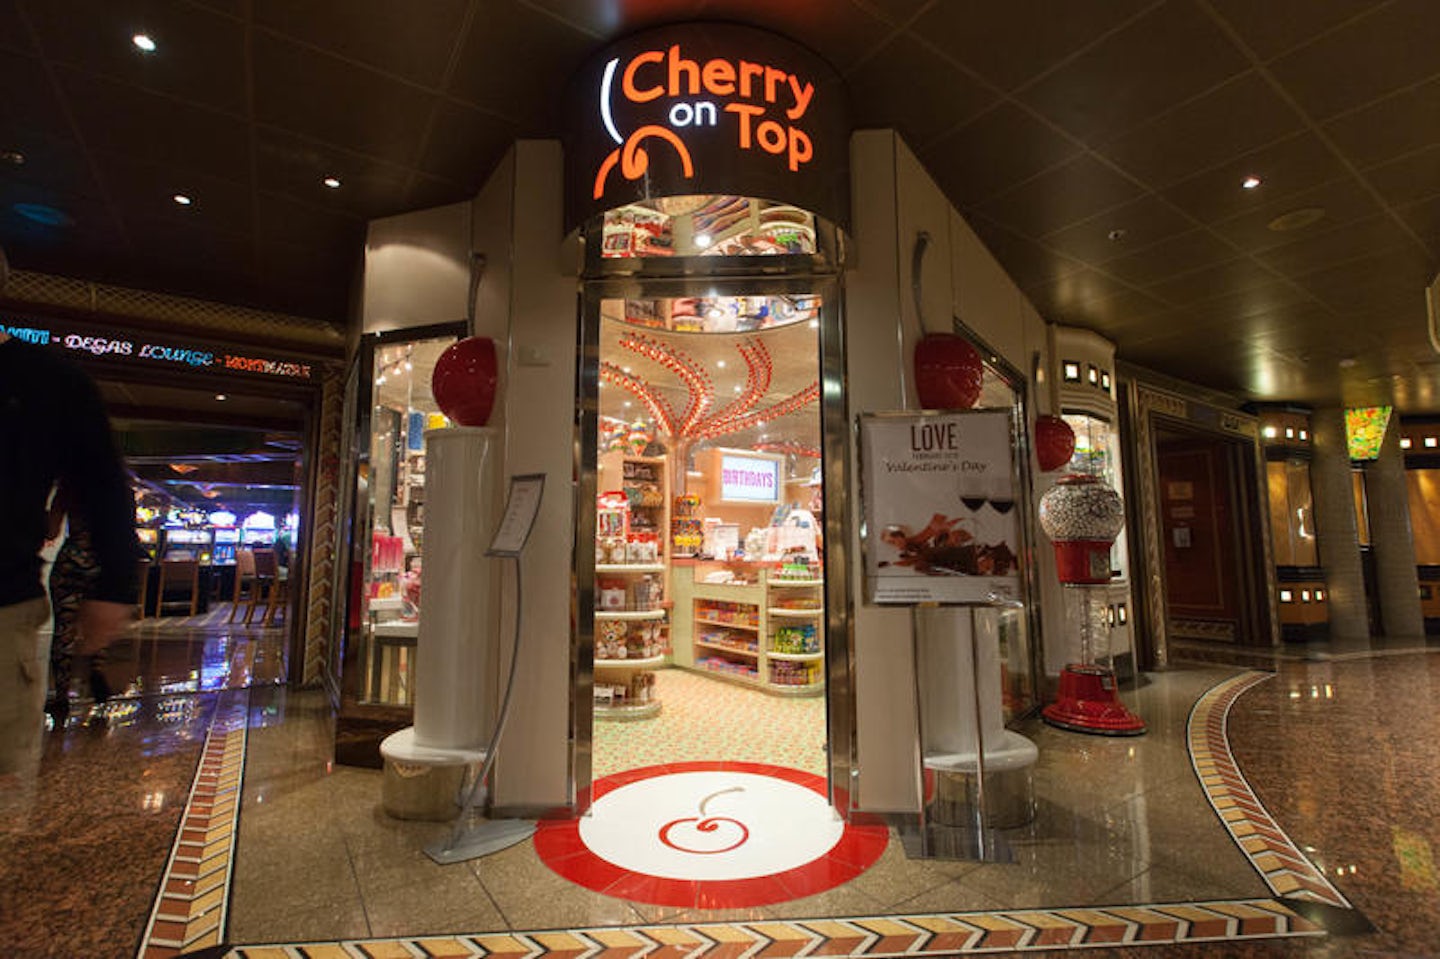 Cherry On Top on Carnival Conquest